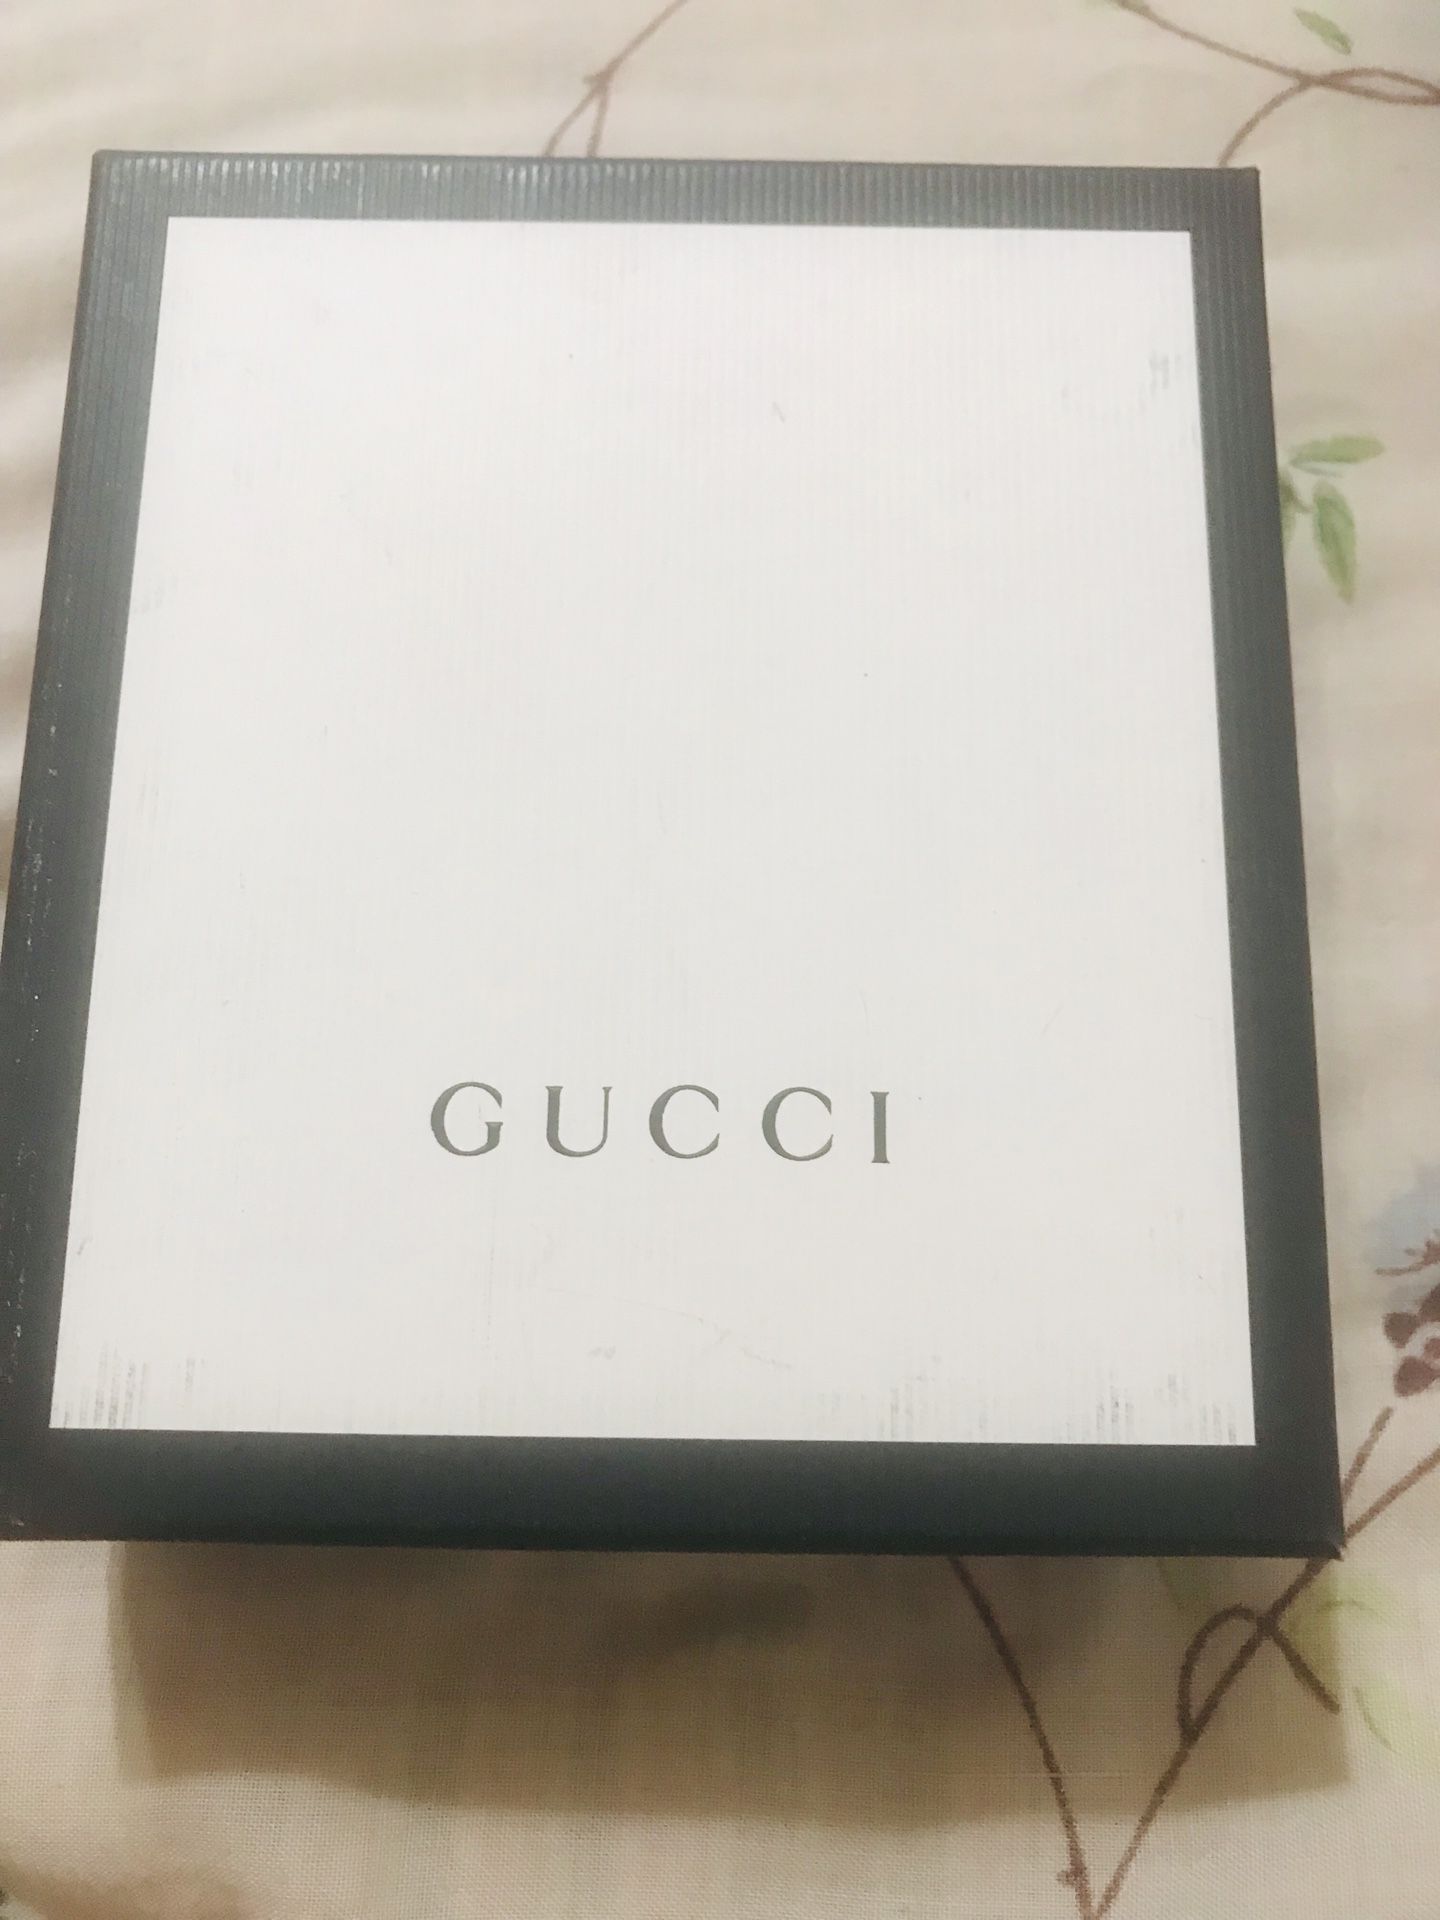 Gucci wallet and Tom Ford sun glasses